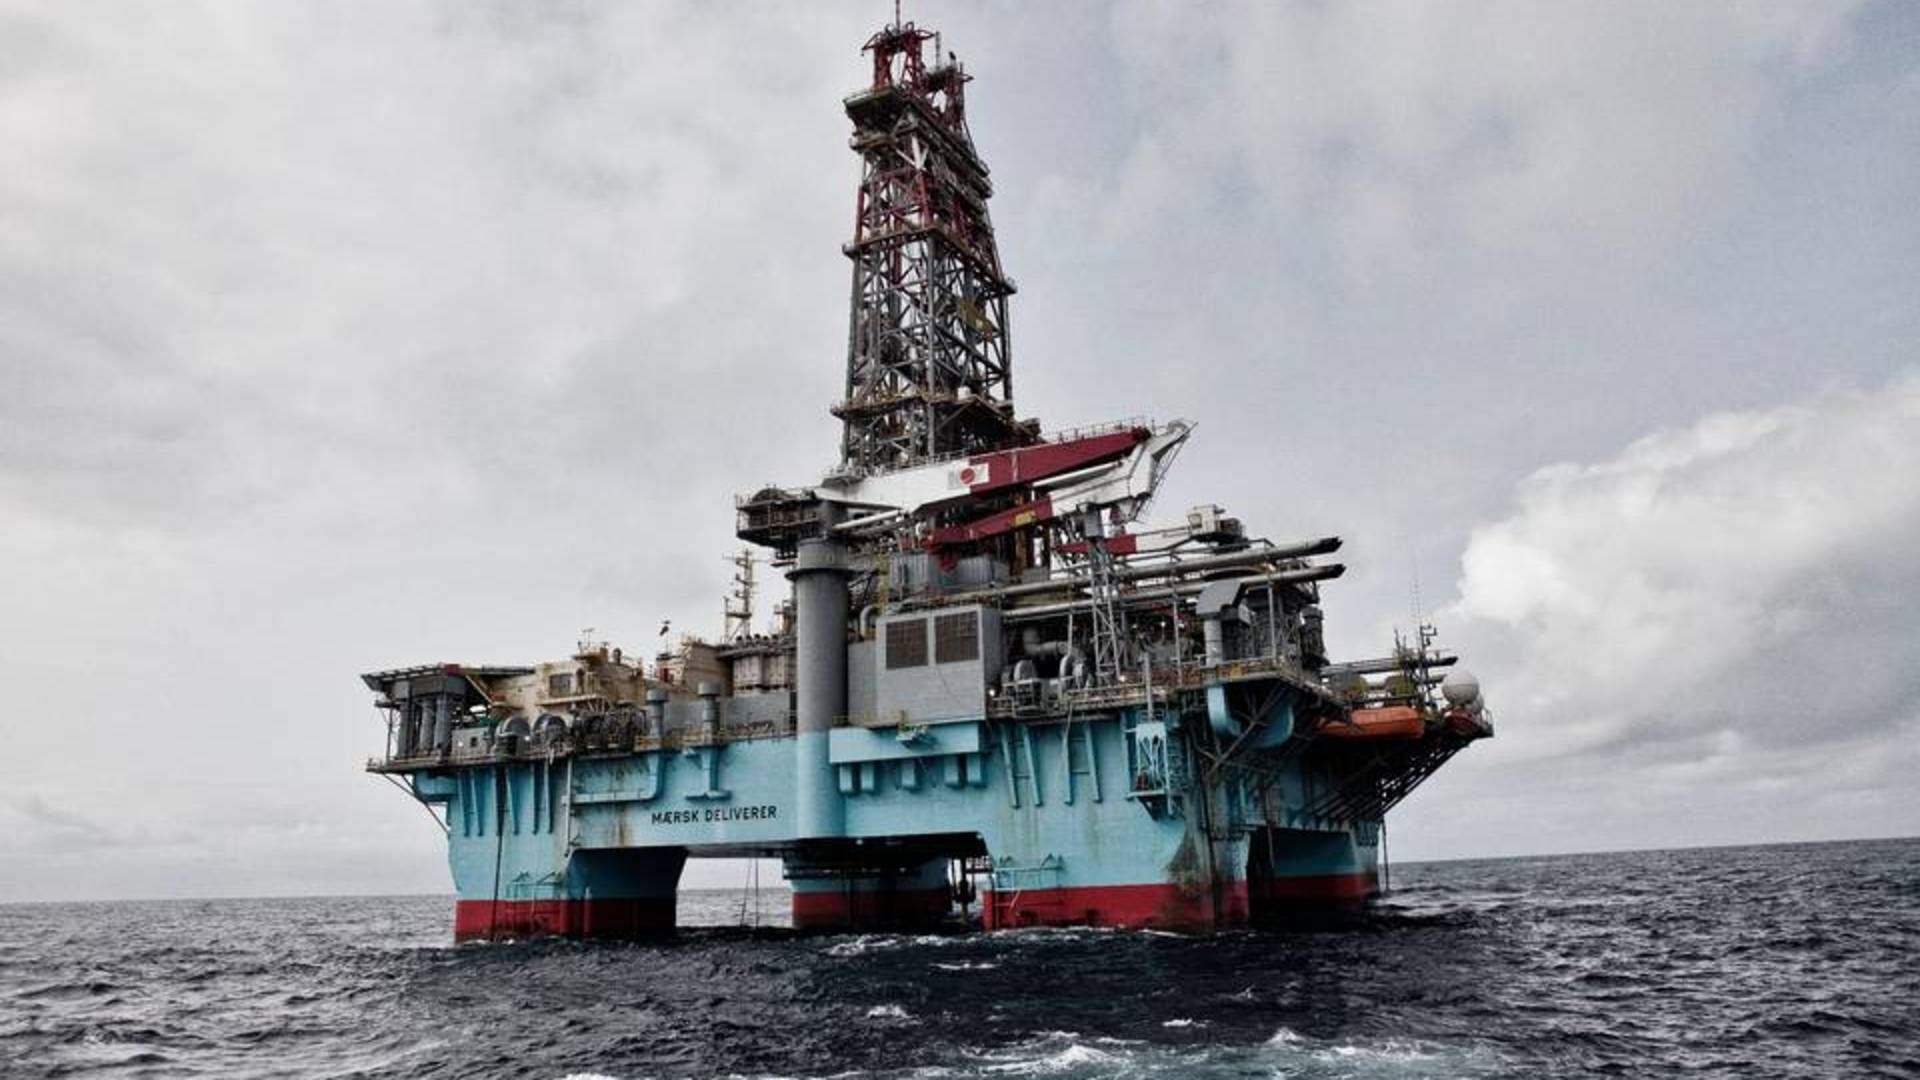 Photo: Maersk Drilling